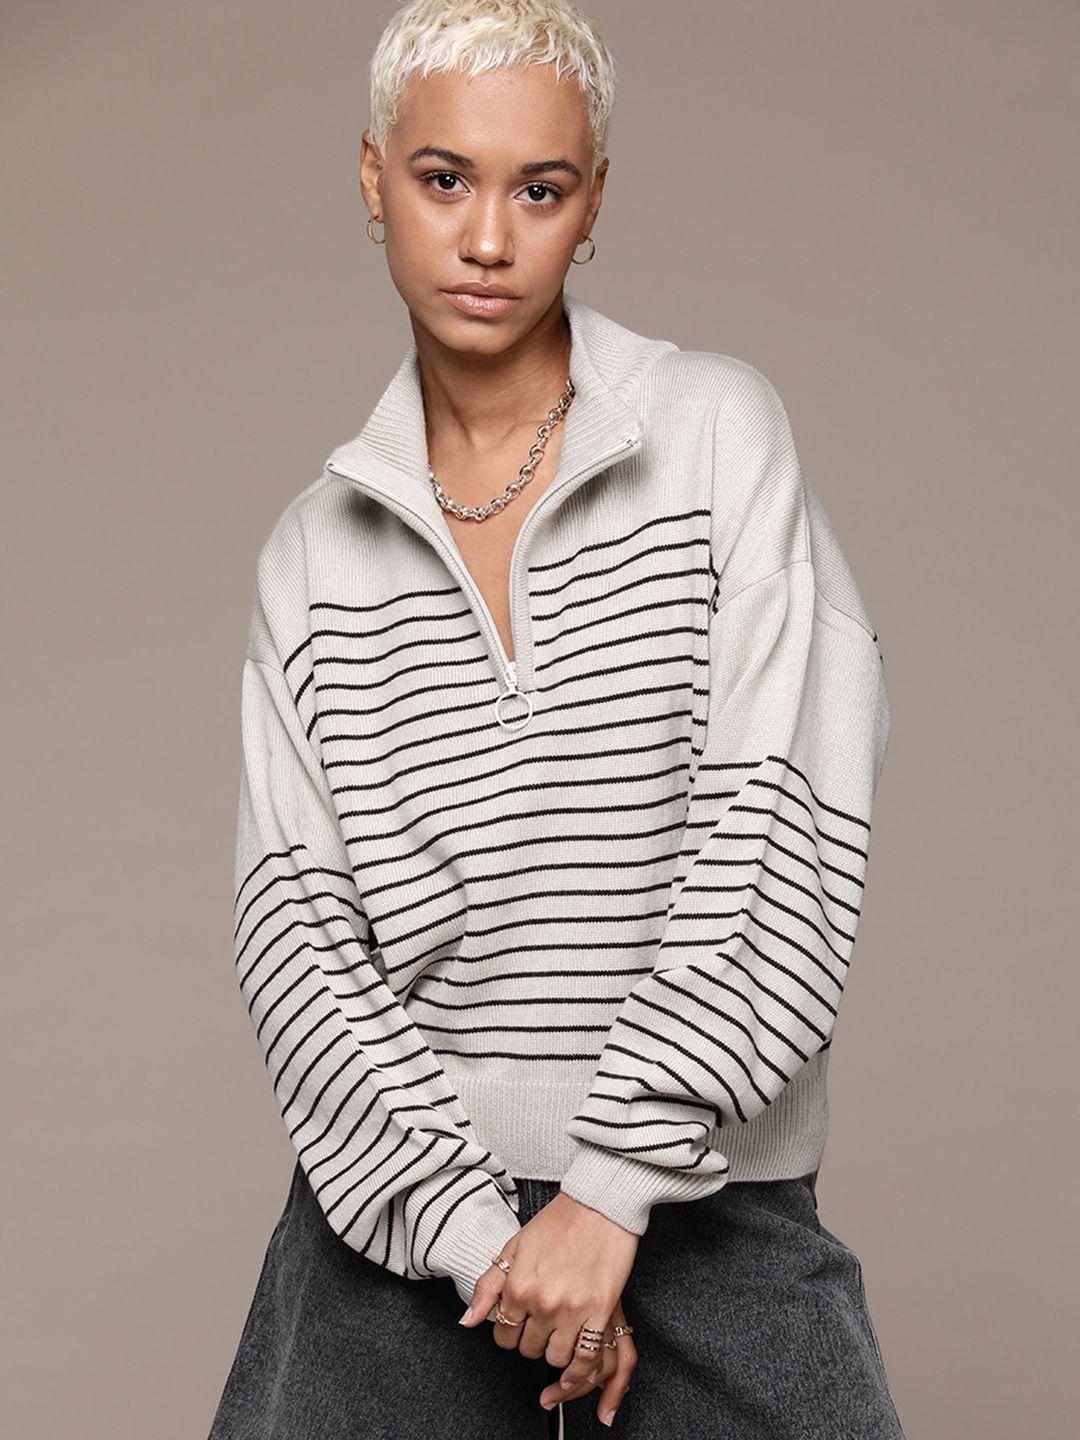 the roadster lifestyle co. mock collar drop-full sleeves striped pullover